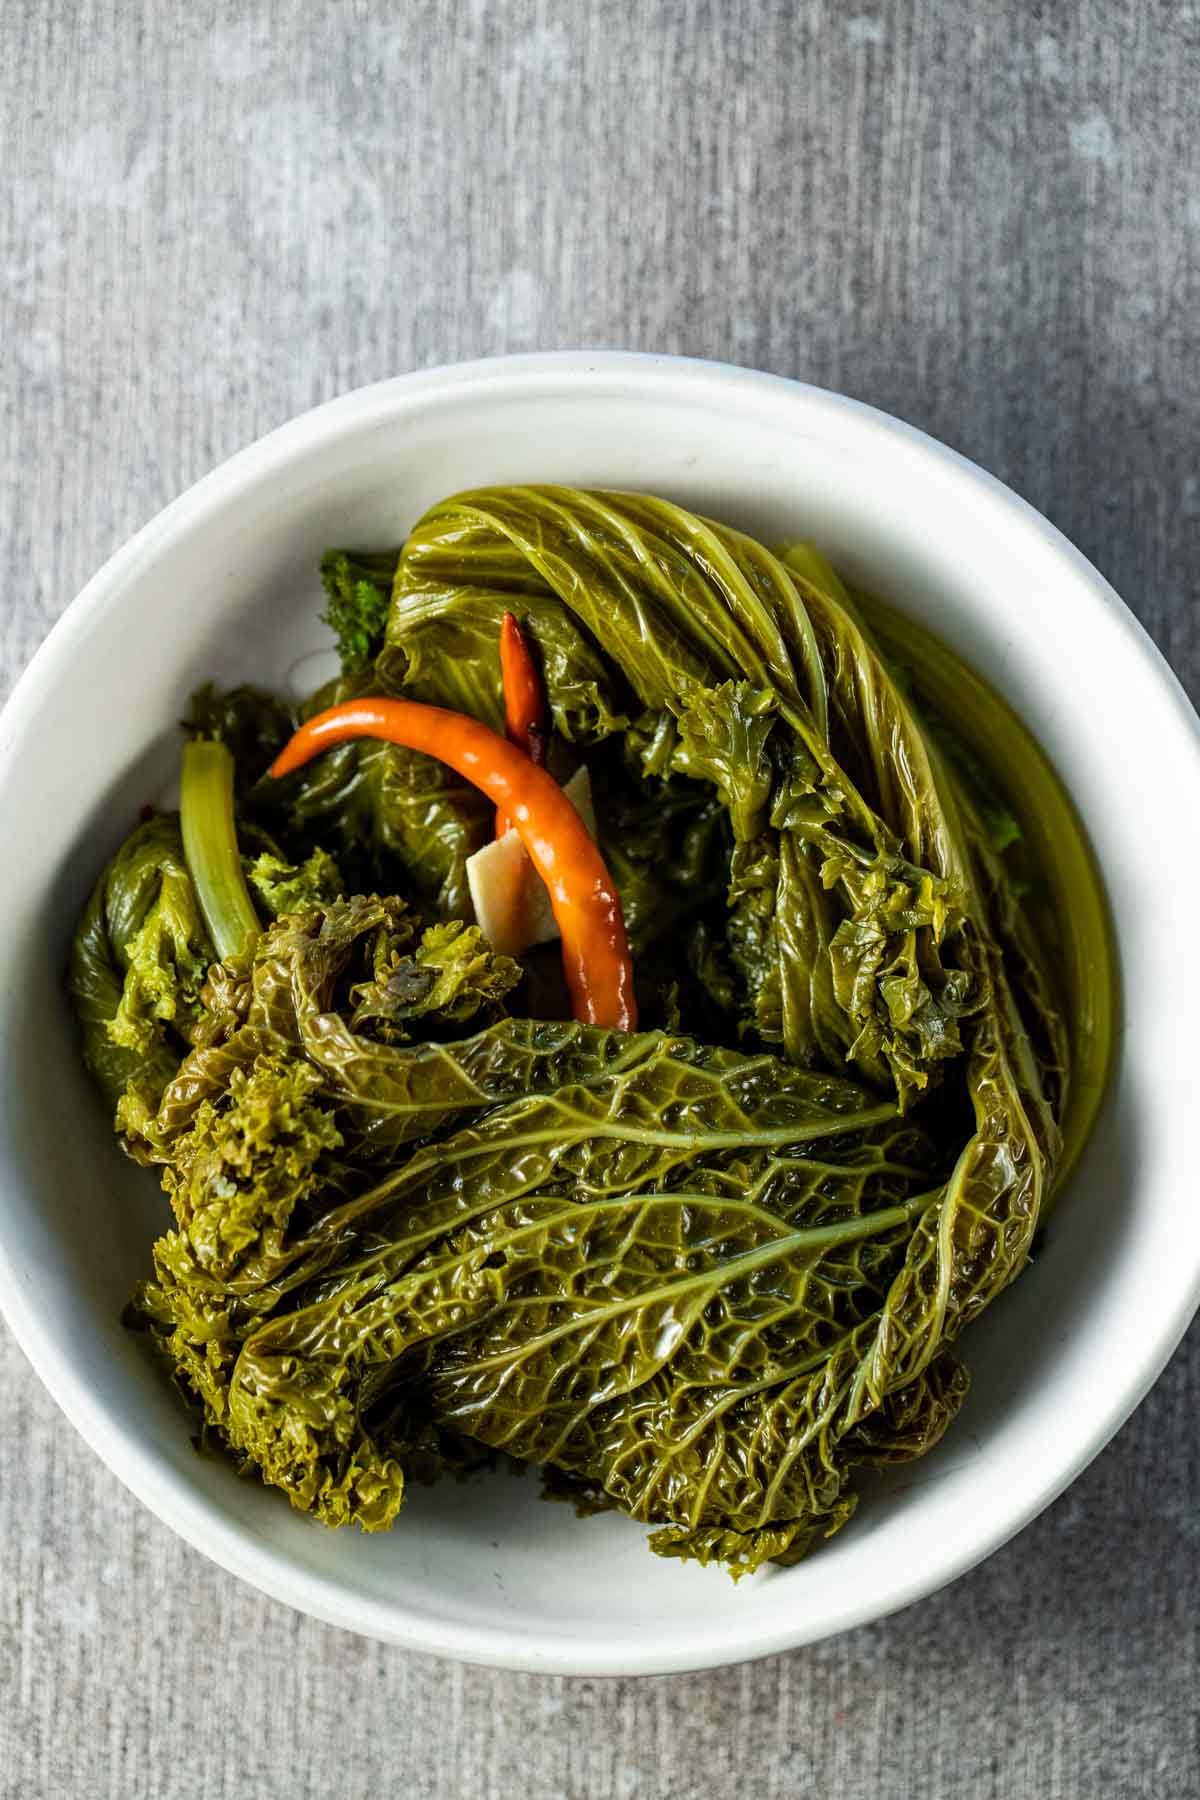 https://www.wenthere8this.com/wp-content/uploads/2022/08/pickled-mustard-greens-6.jpg